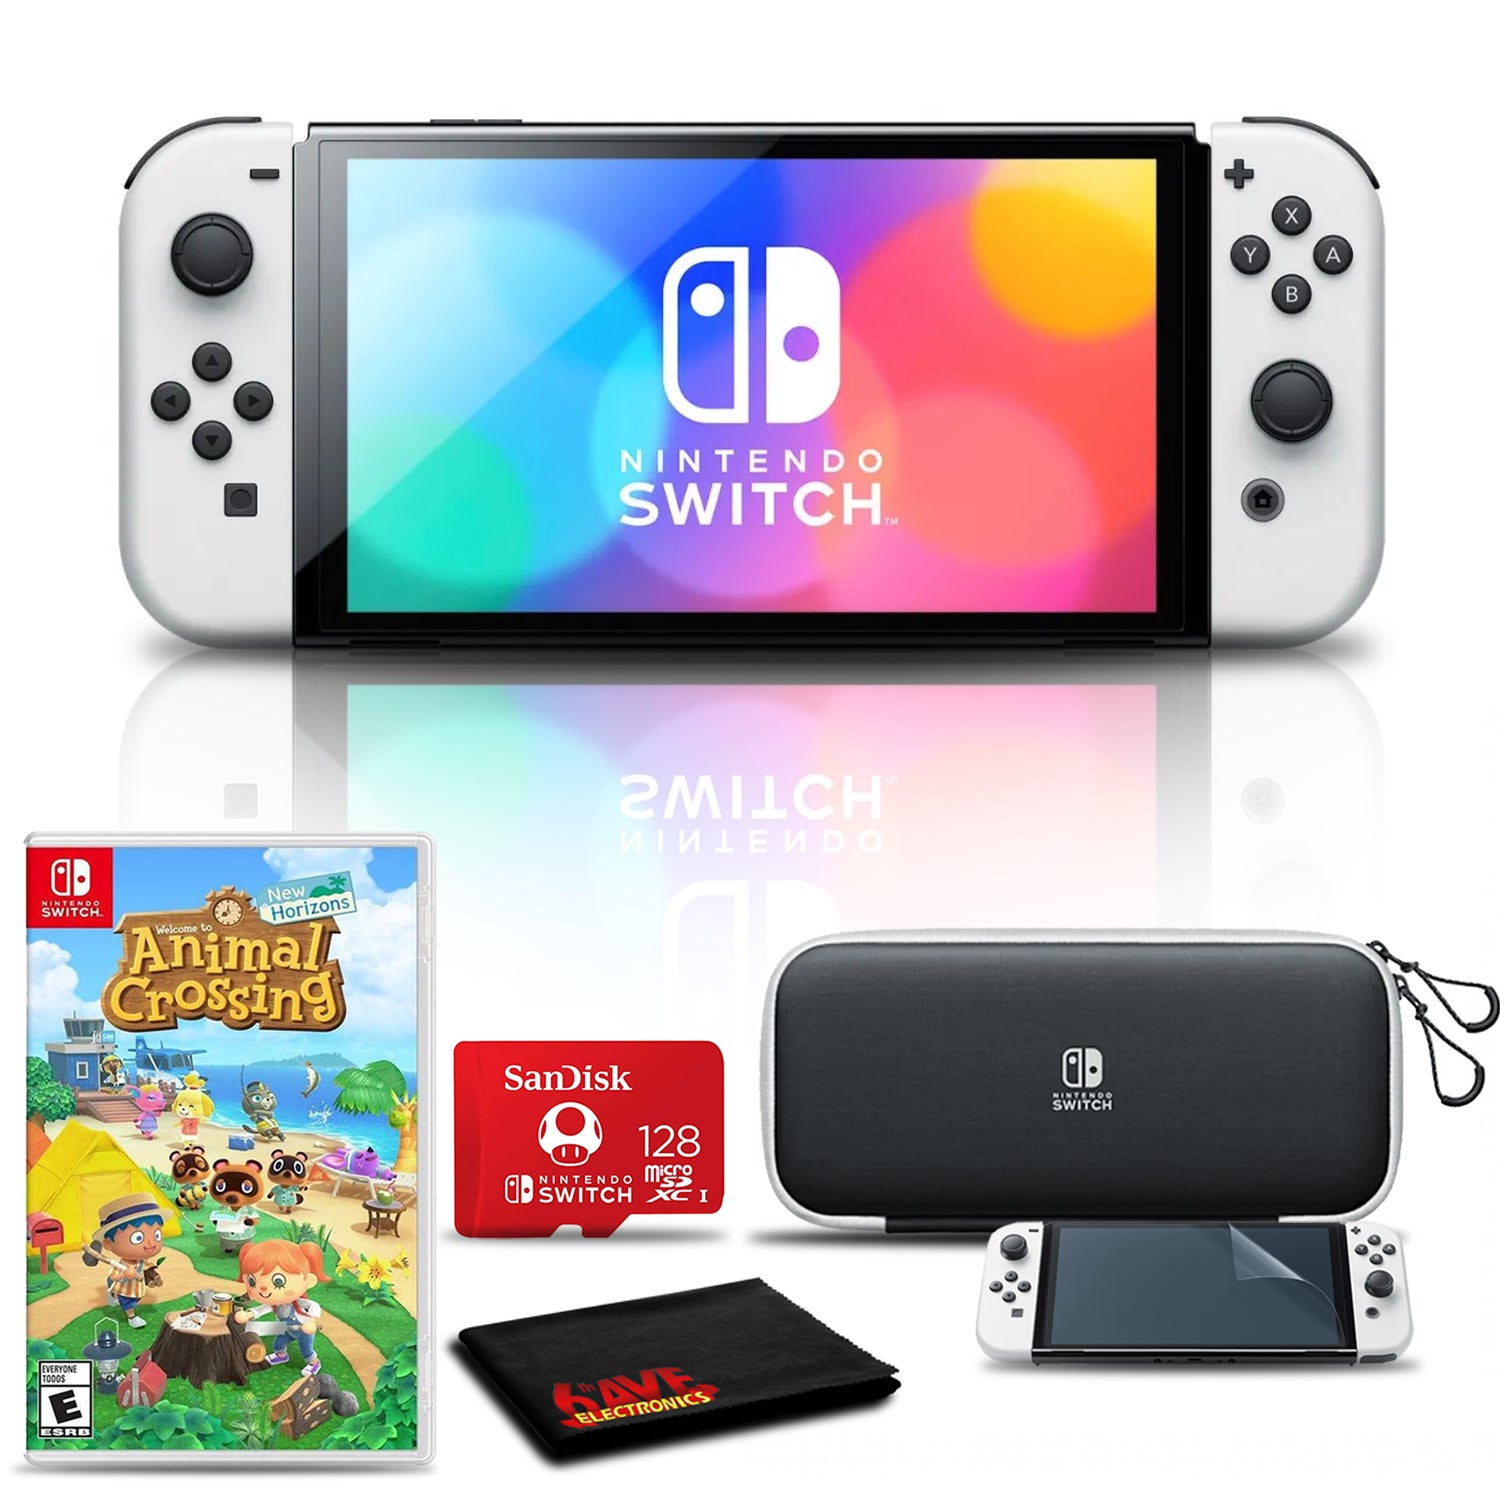 Nintendo Switch OLED White with Animal Crossing, 128GB Card Bundle